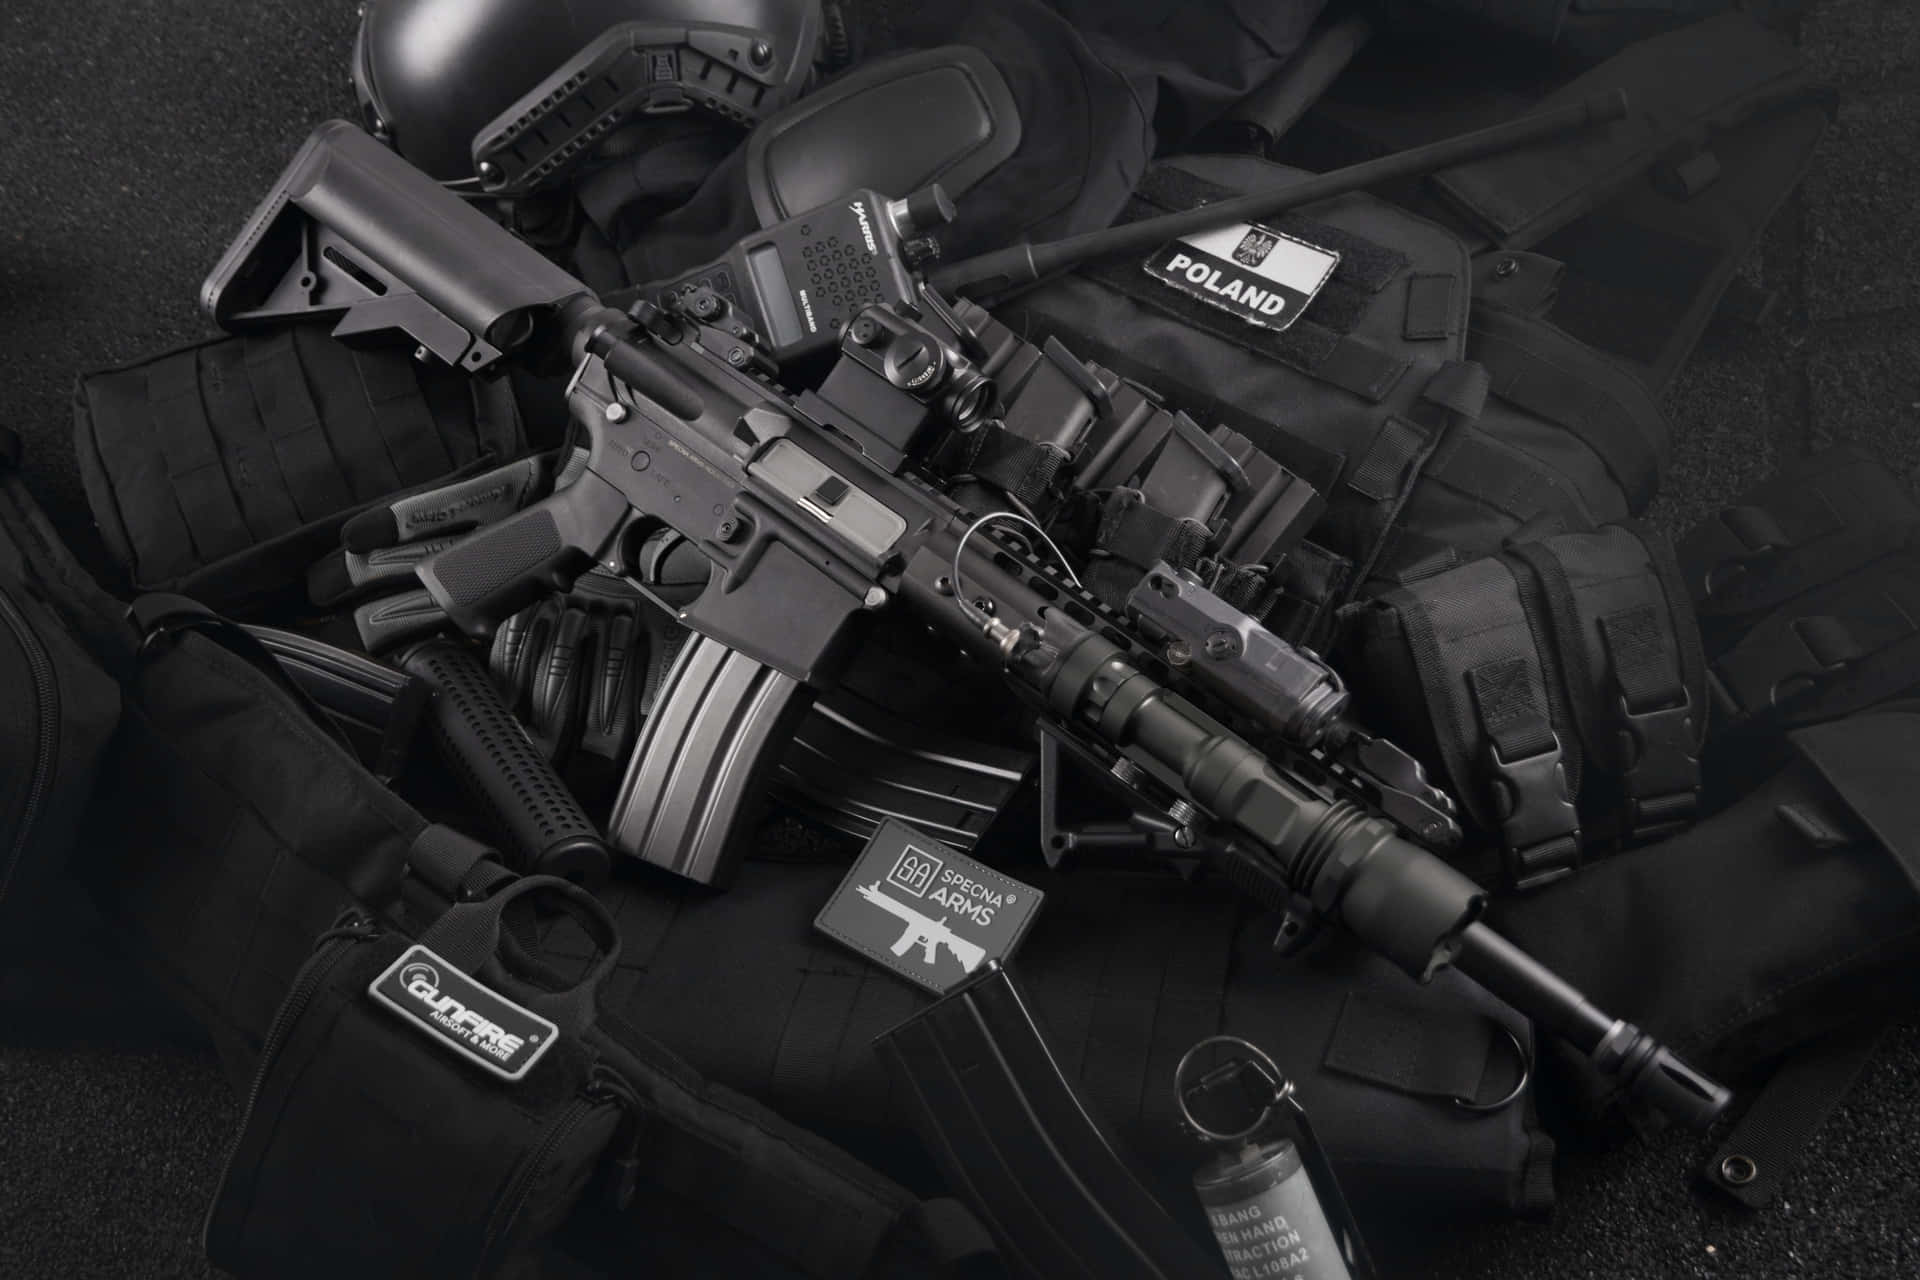 A Black Rifle And Other Equipment On A Black Background